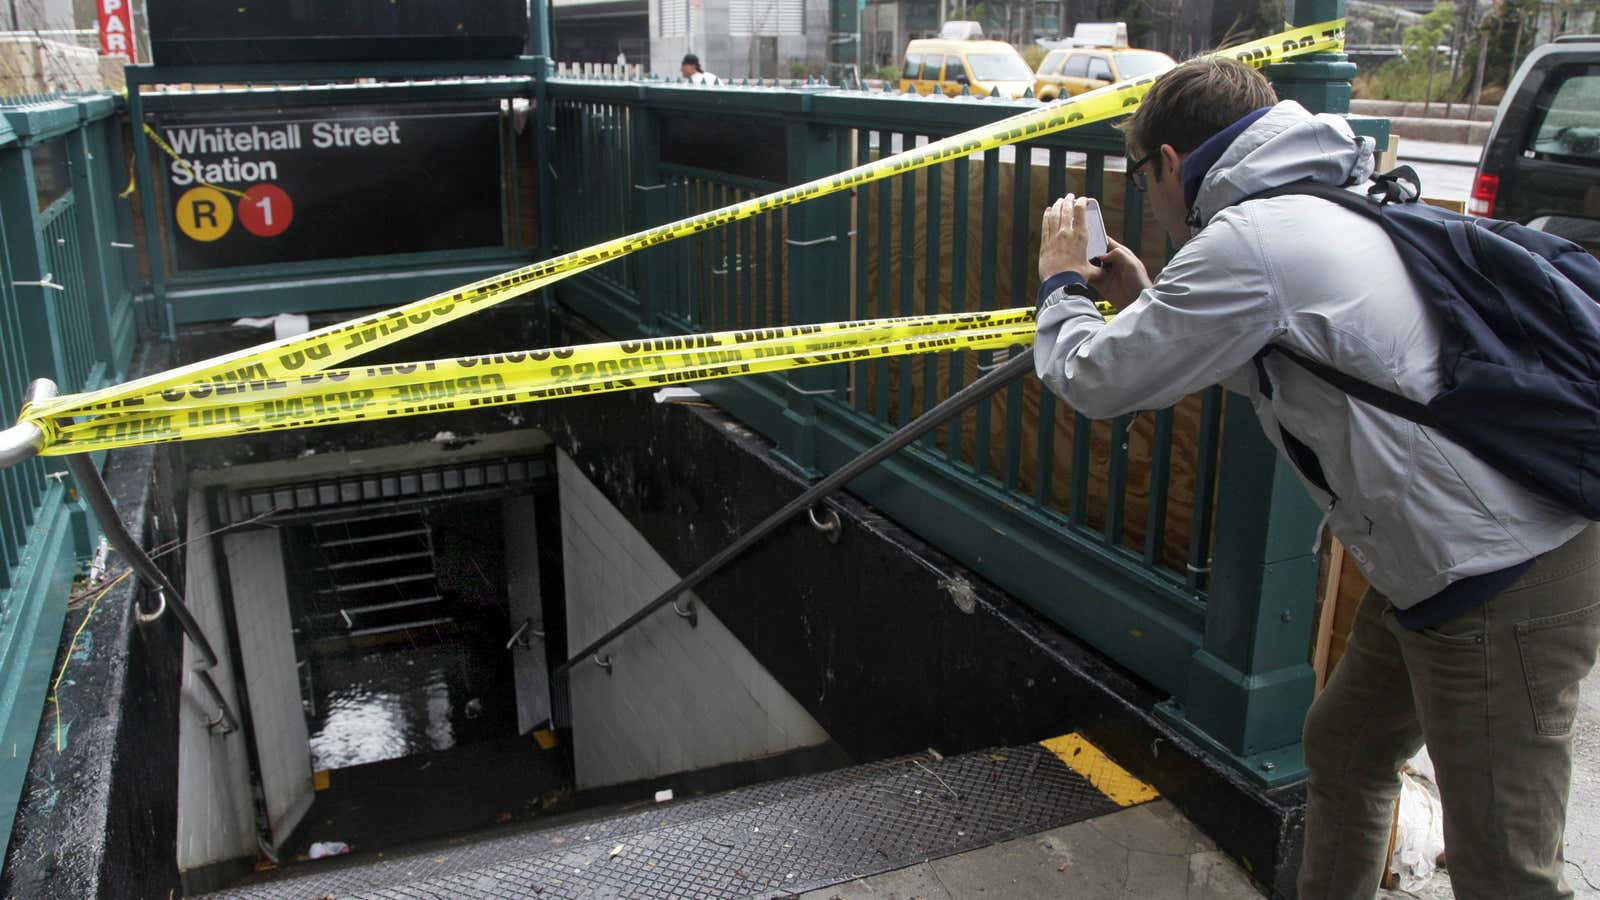 Saltwater has flooded the aging subway system in New York City.